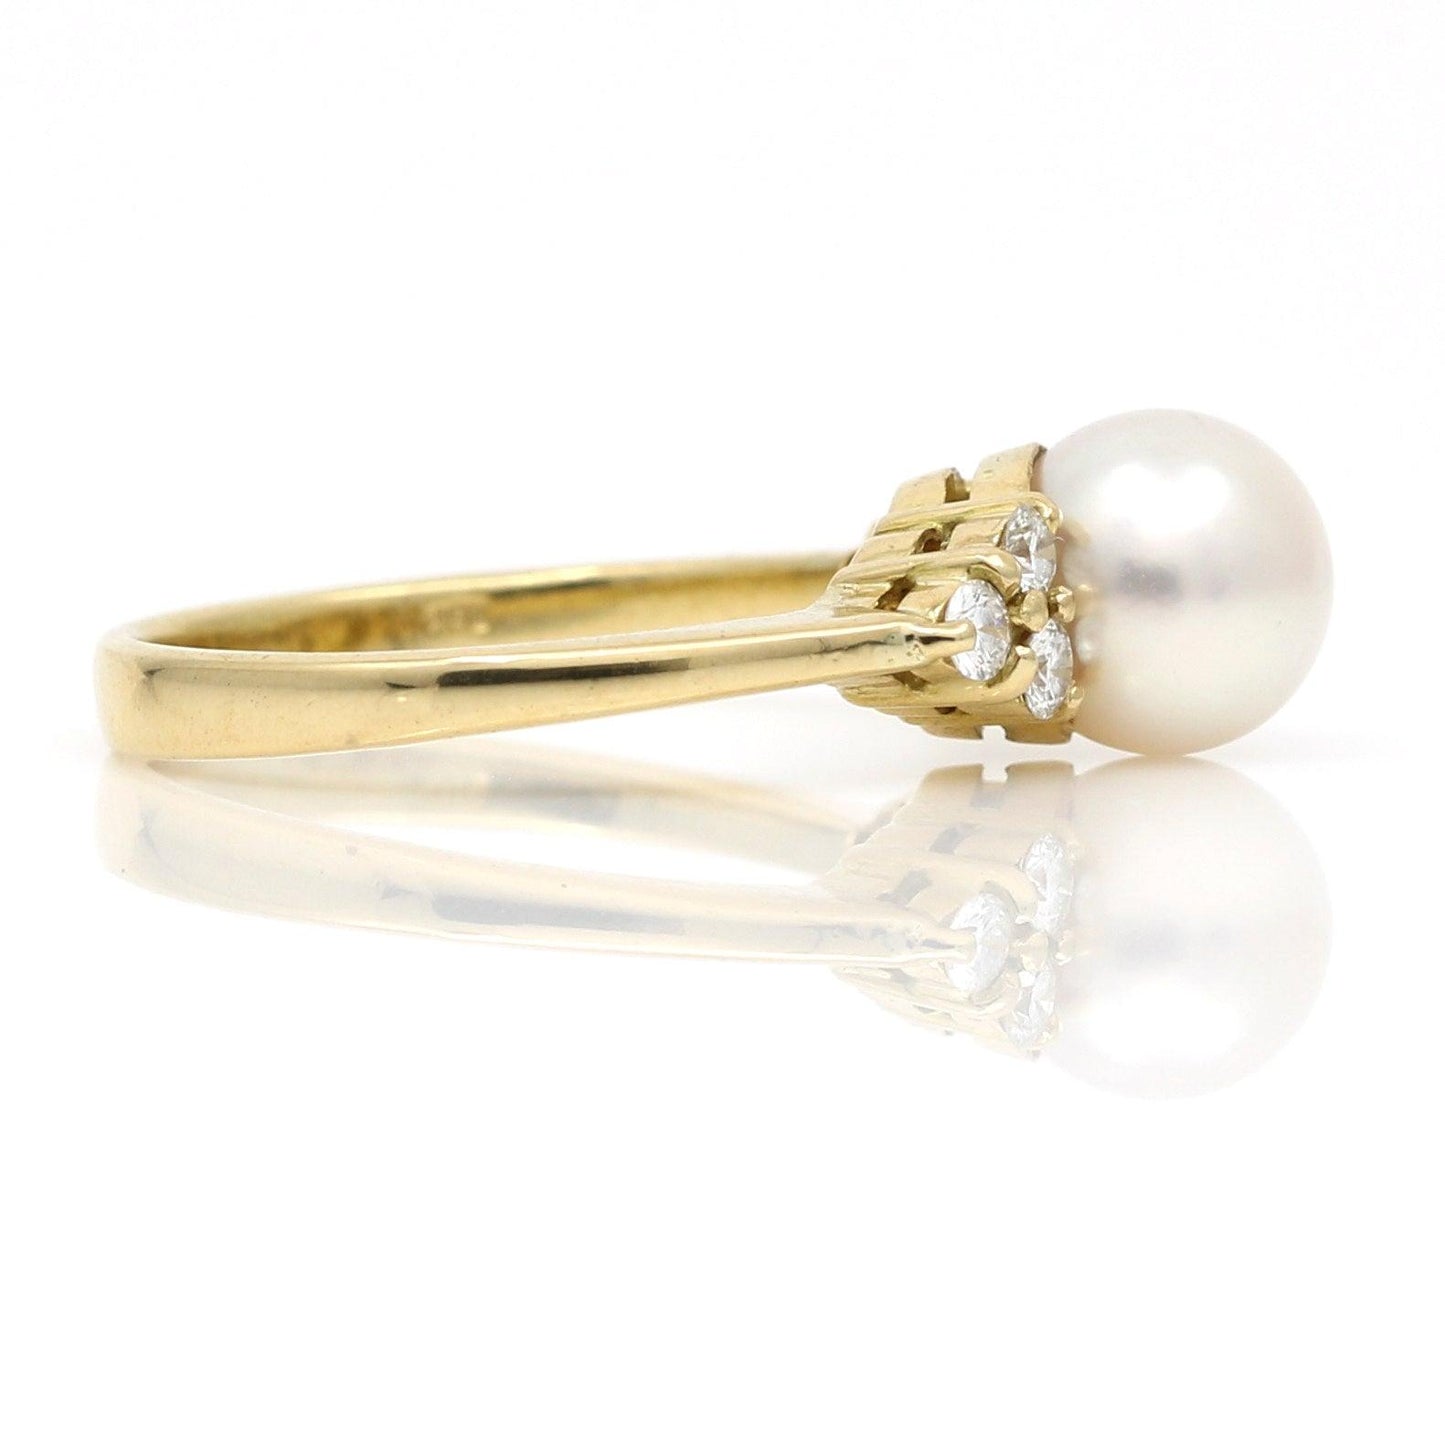 Women's 7.5mm Pearl and Diamond Ring in 18k Yellow Gold SIGNED - 31 Jewels Inc.